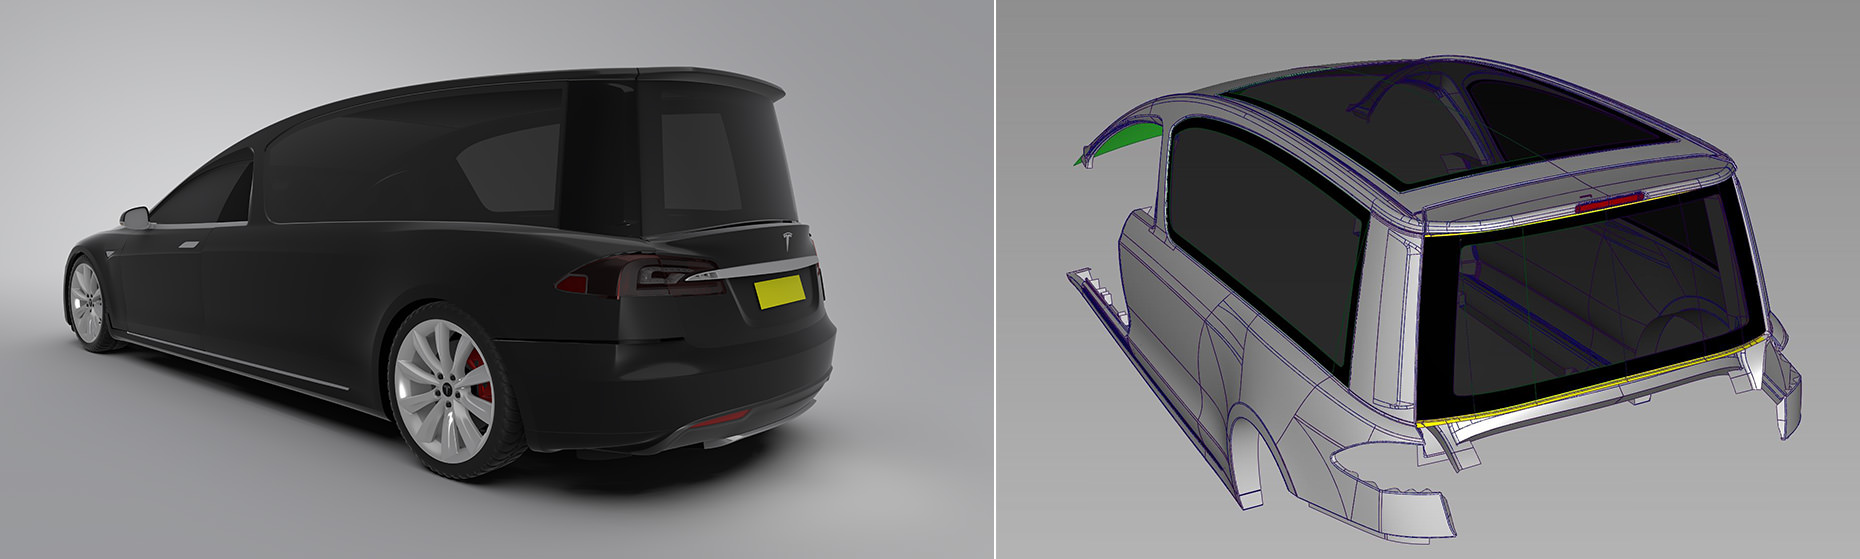 Premium Electric Hearse with Extended Wheelbase (Tesla S)